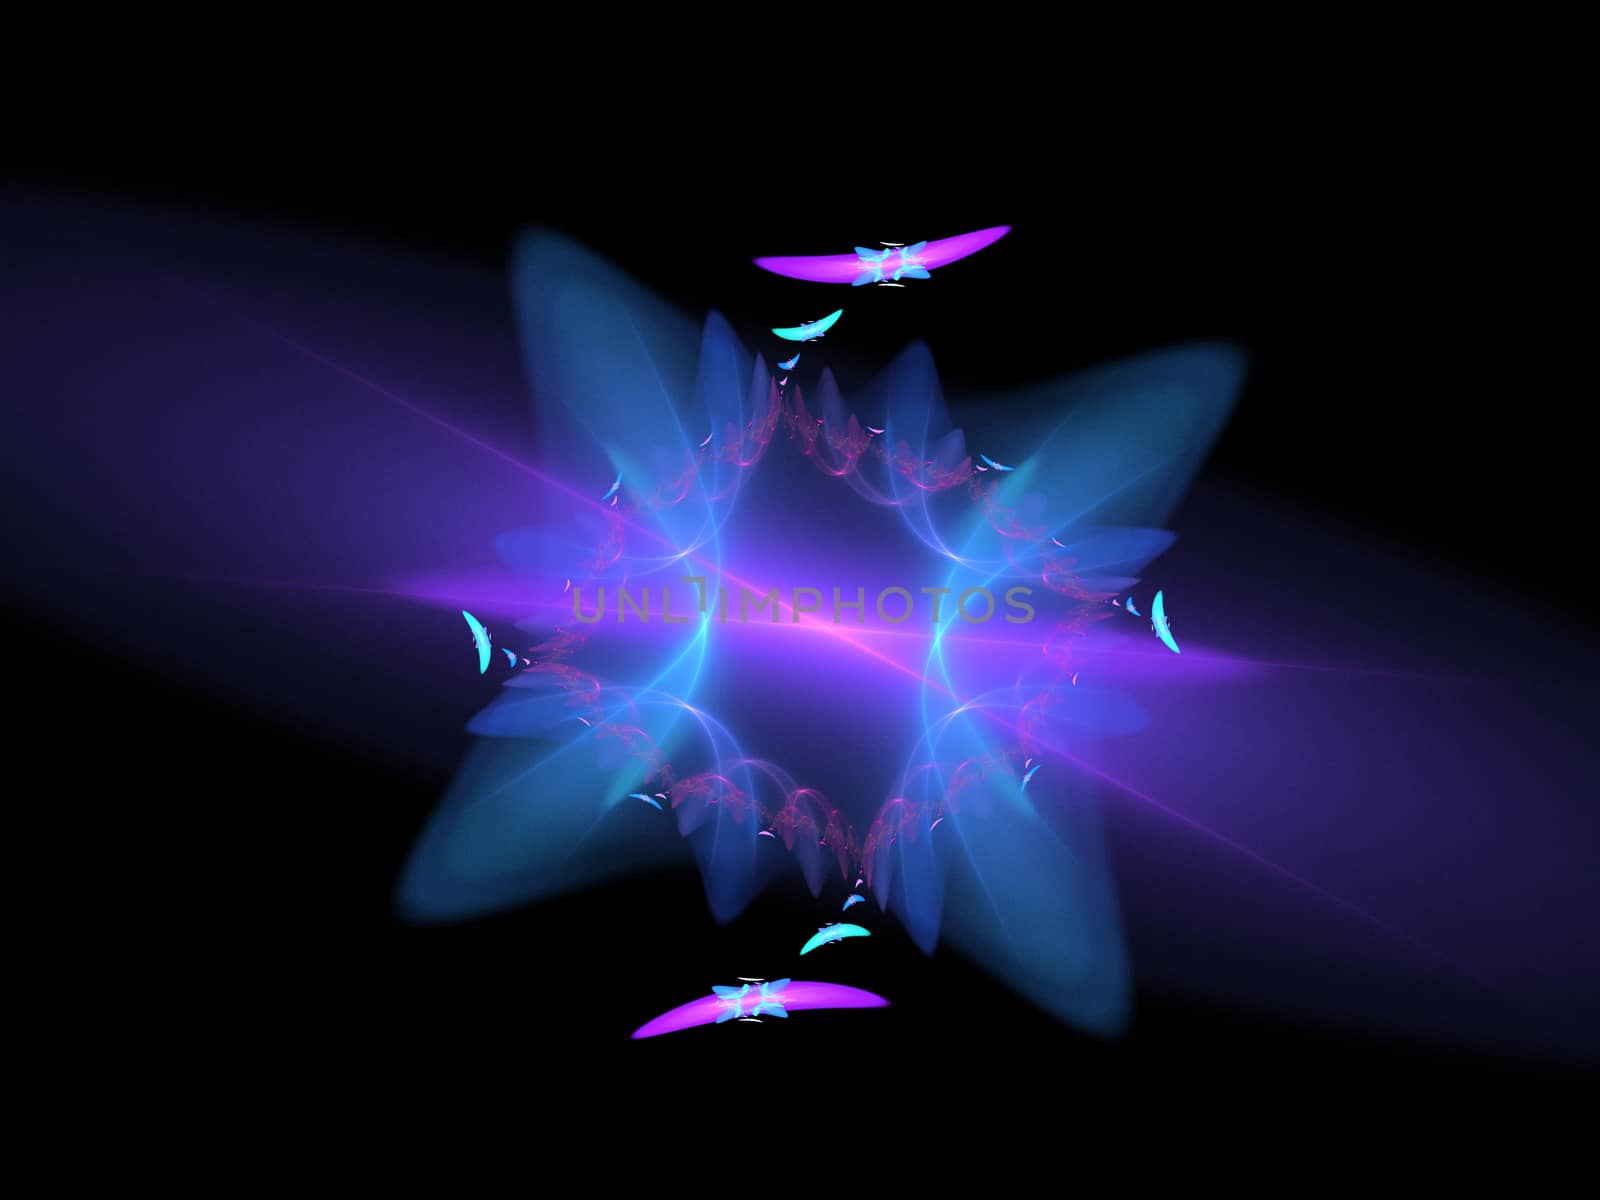 Fractal flower. This image was created using fractal generating and graphic manipulation software.